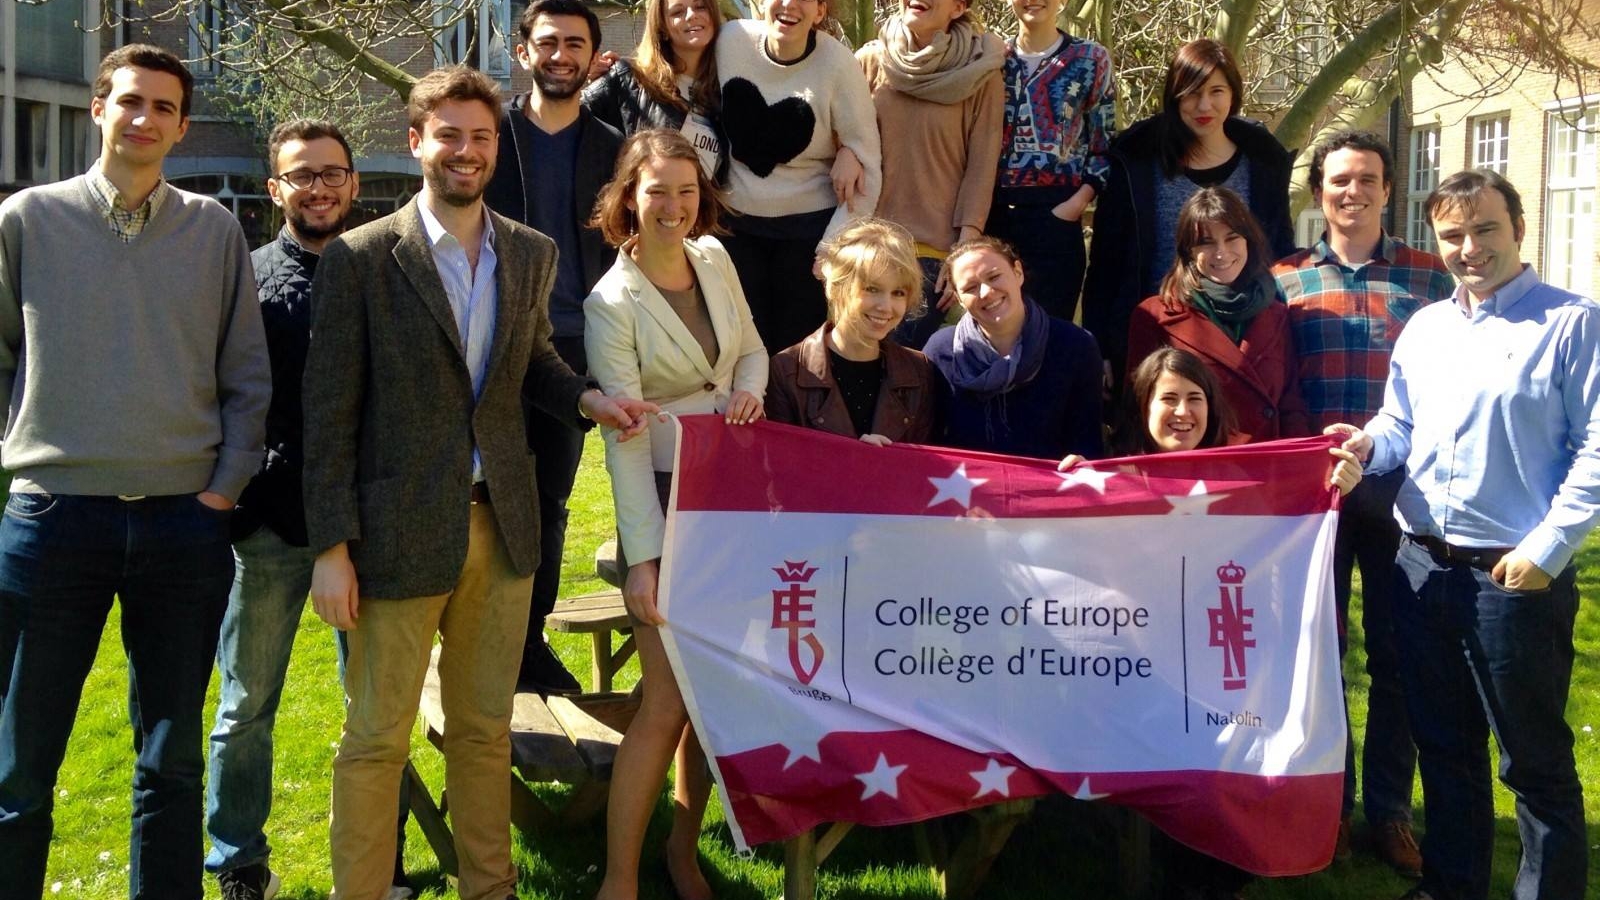 College of Europe offers scholarships for university graduates from Neighbourhood countries